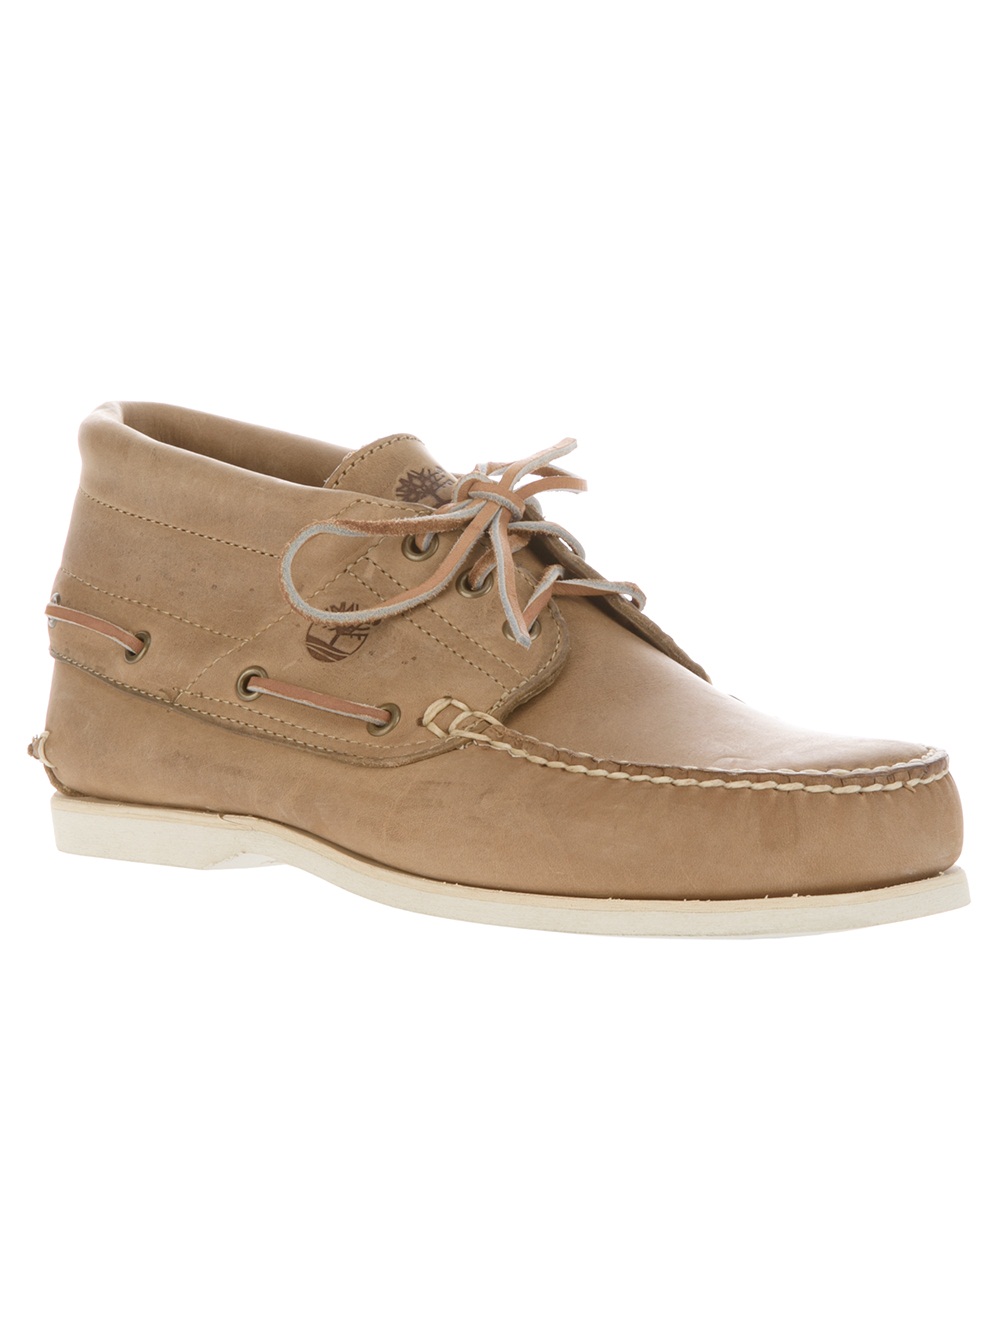 Timberland Half Cab Boat Boot in Brown for Men - Lyst